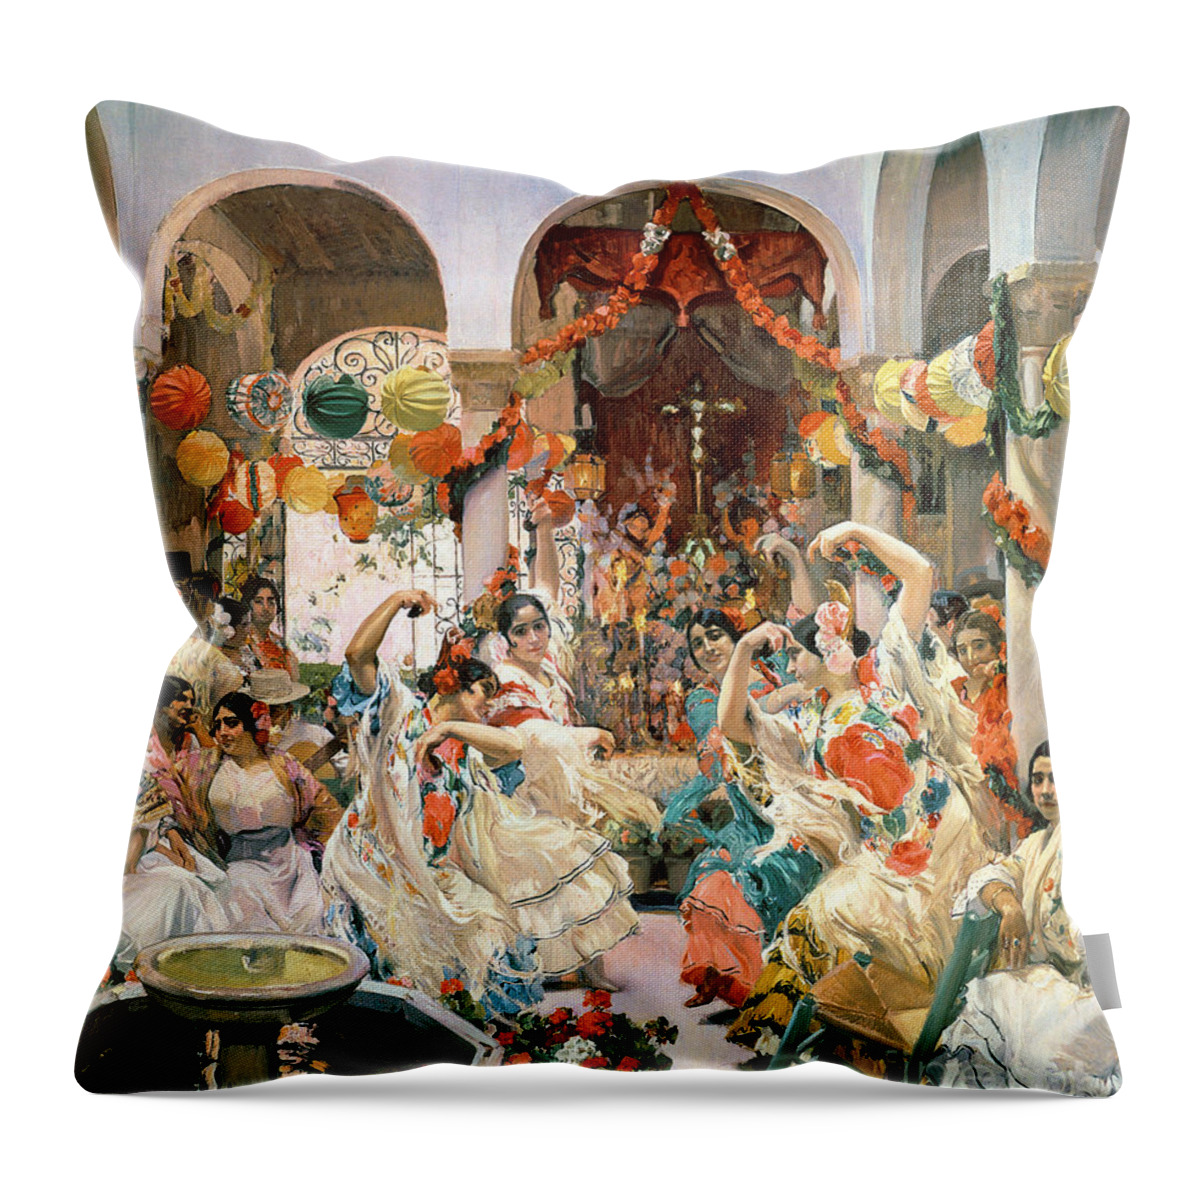 Seville Throw Pillow featuring the painting Seville by Joaquin Sorolla y Bastida